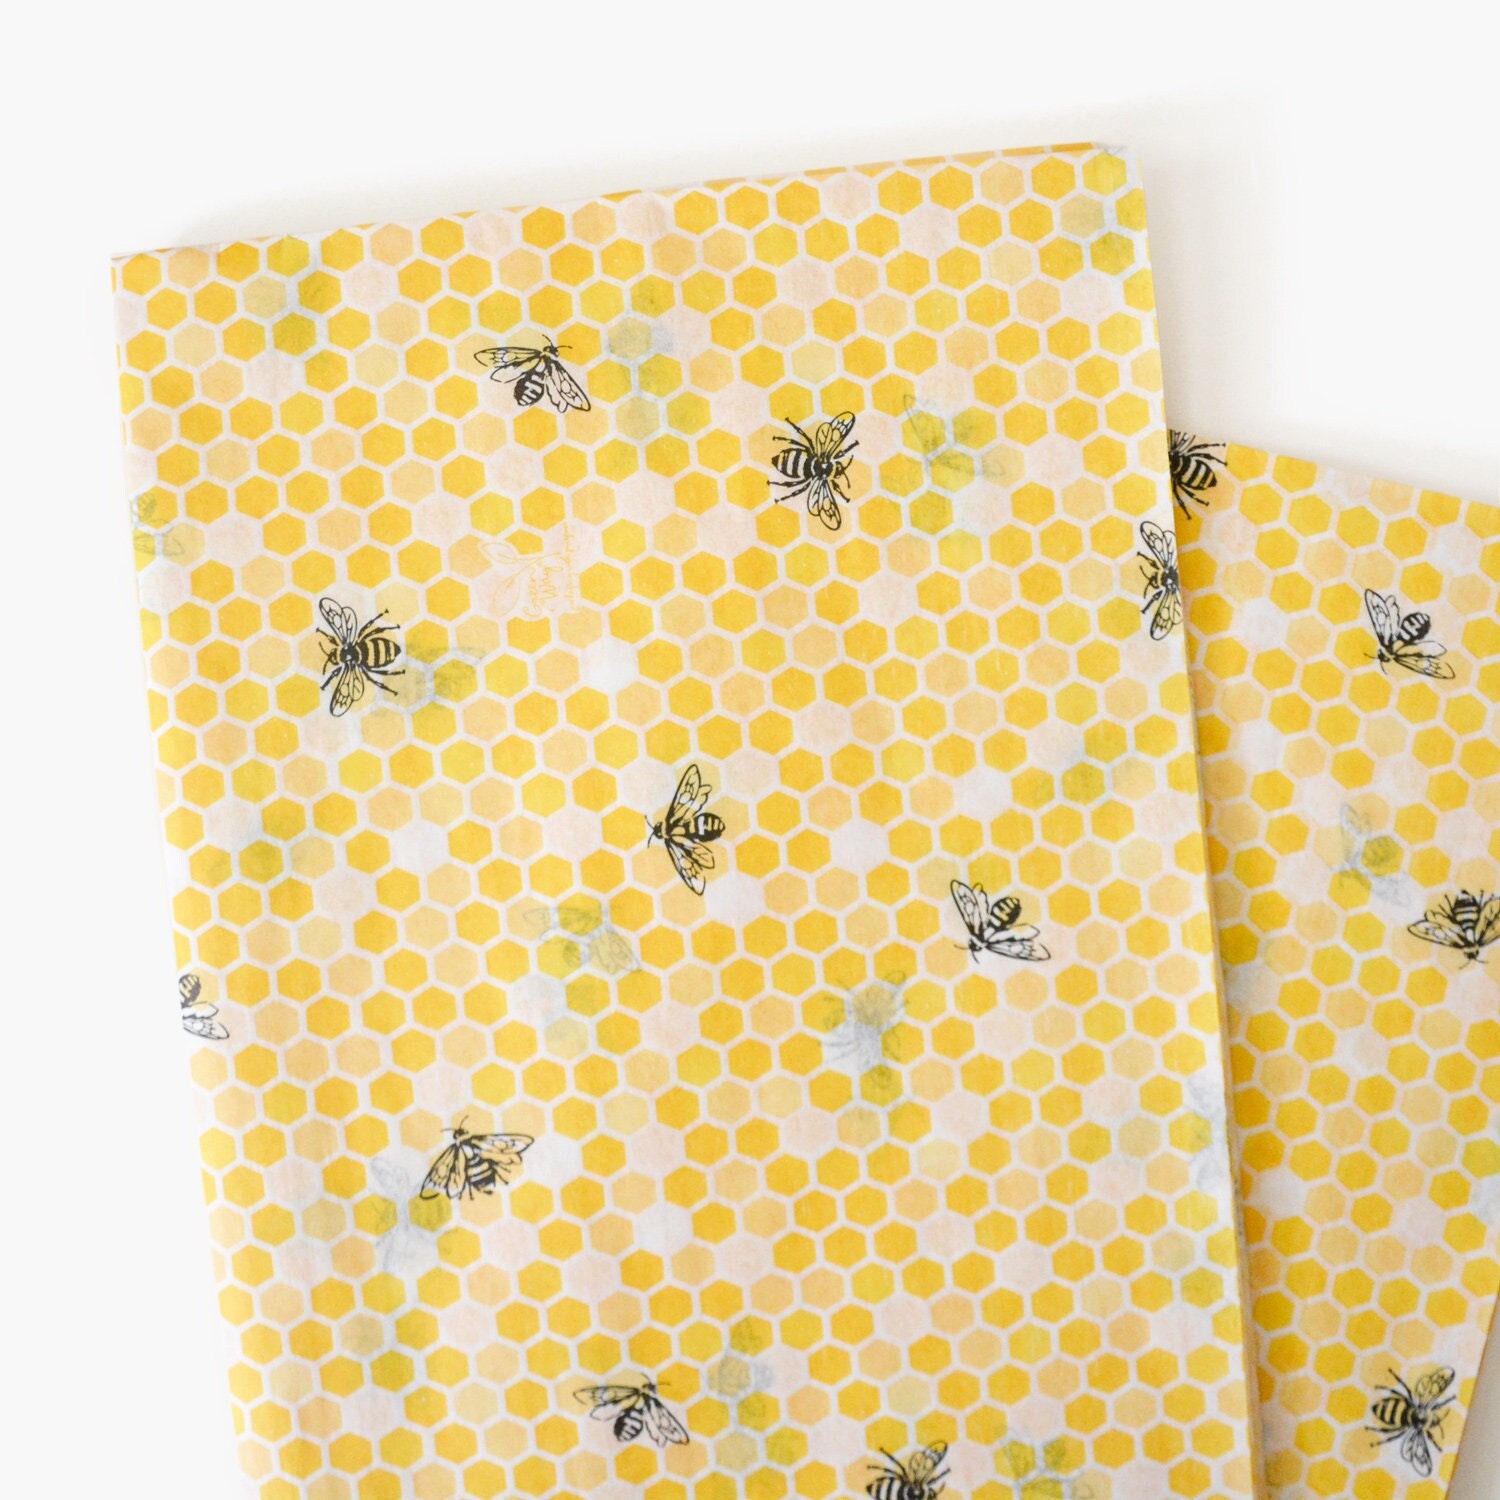 Queen Bee Black and Gold Wrapping Paper, Bumble Bee Gift Wrap